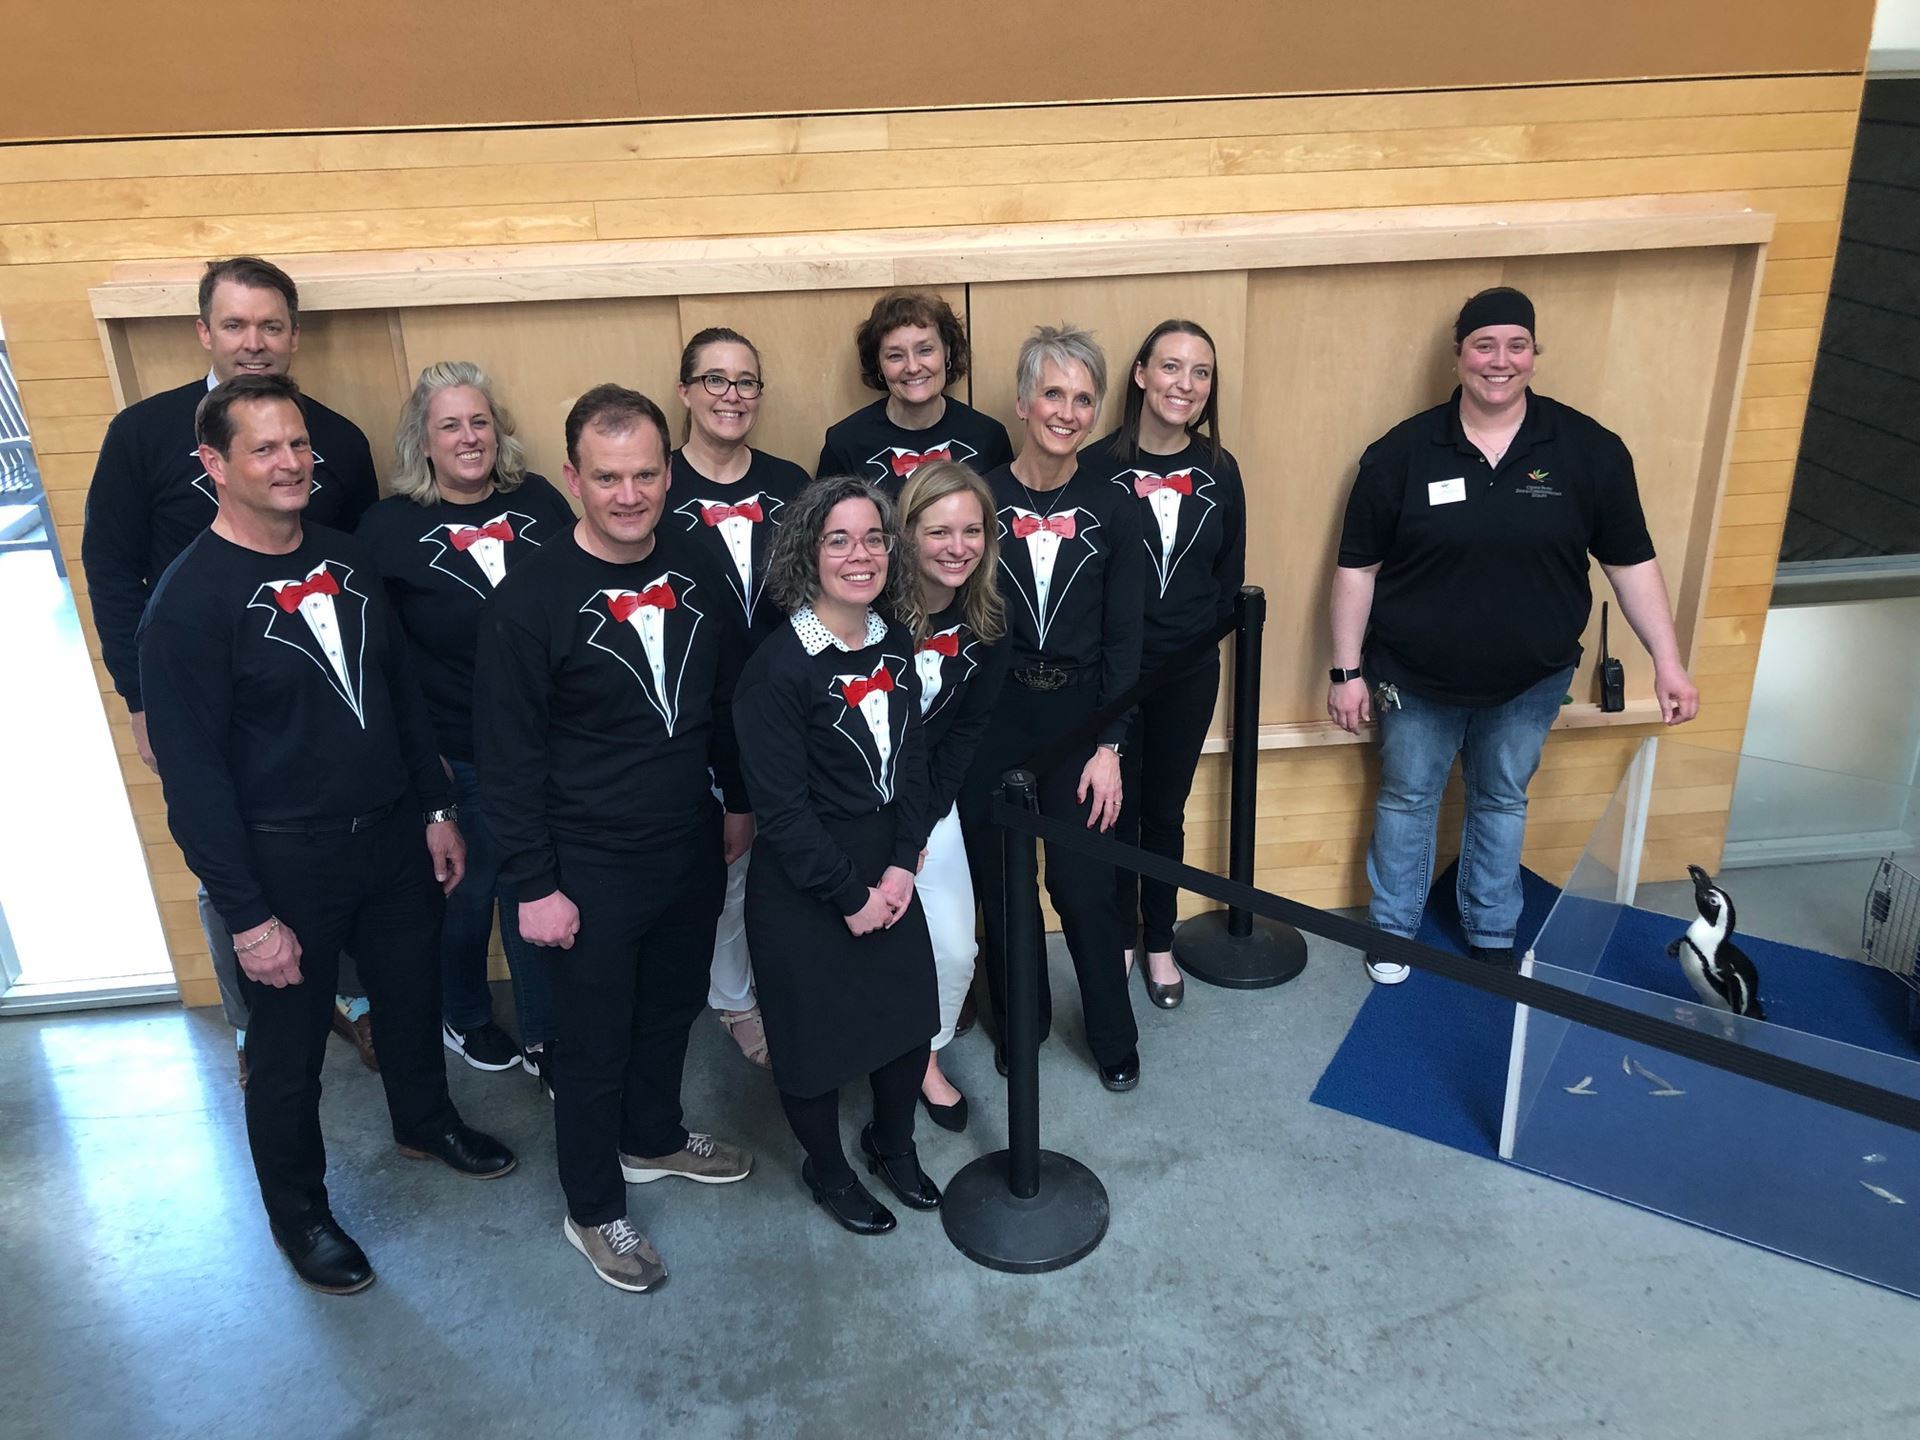 Board members dressed in tuxedos pose next to Cupid the penguin at Como Zoo.